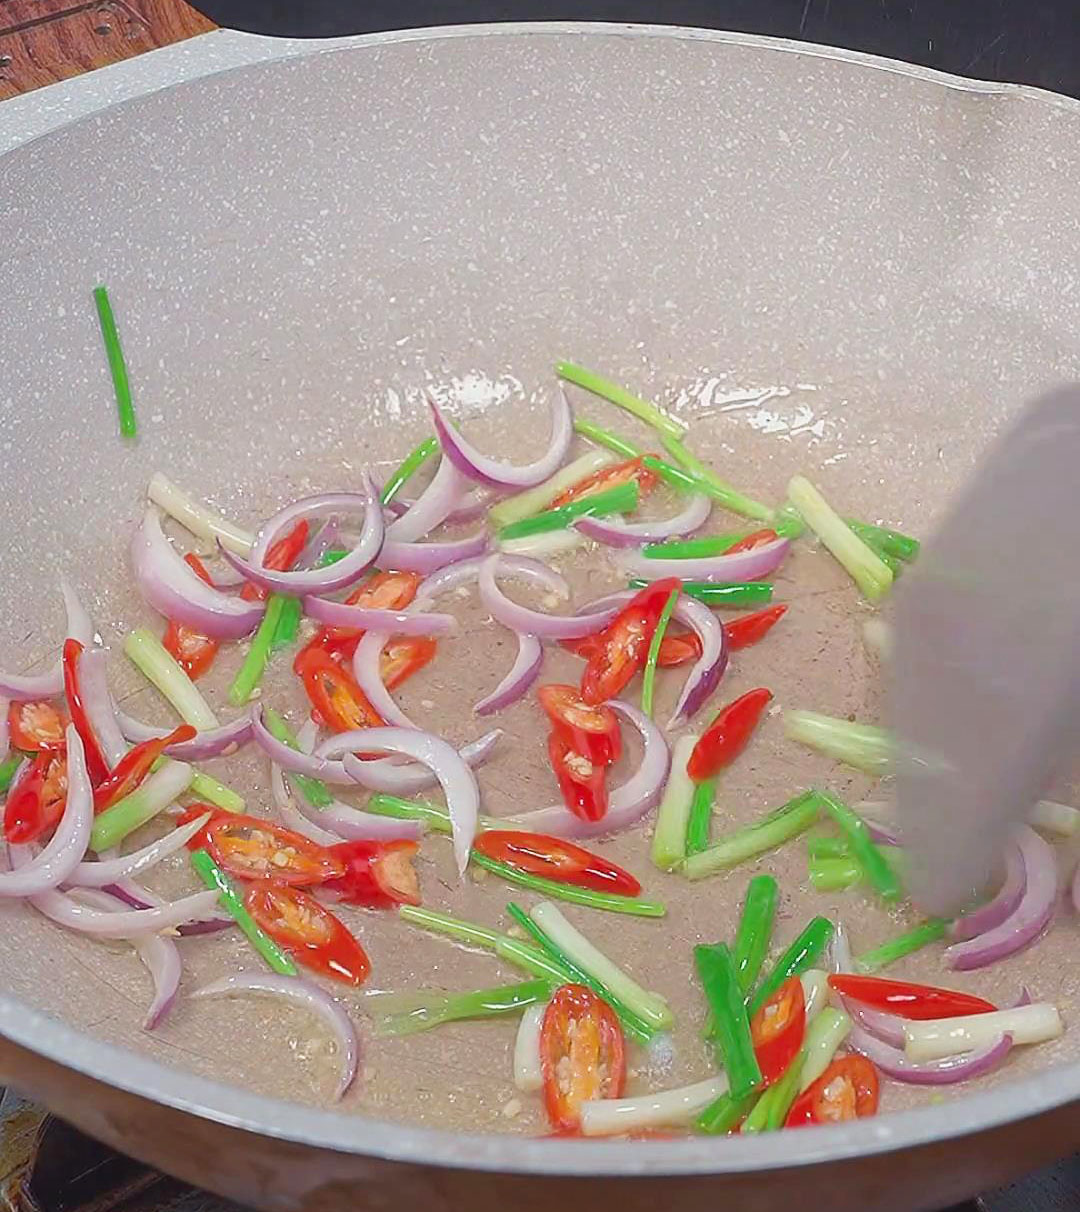 Stir fry the chopped red onions, chopped green onions, and Thai chili pepper